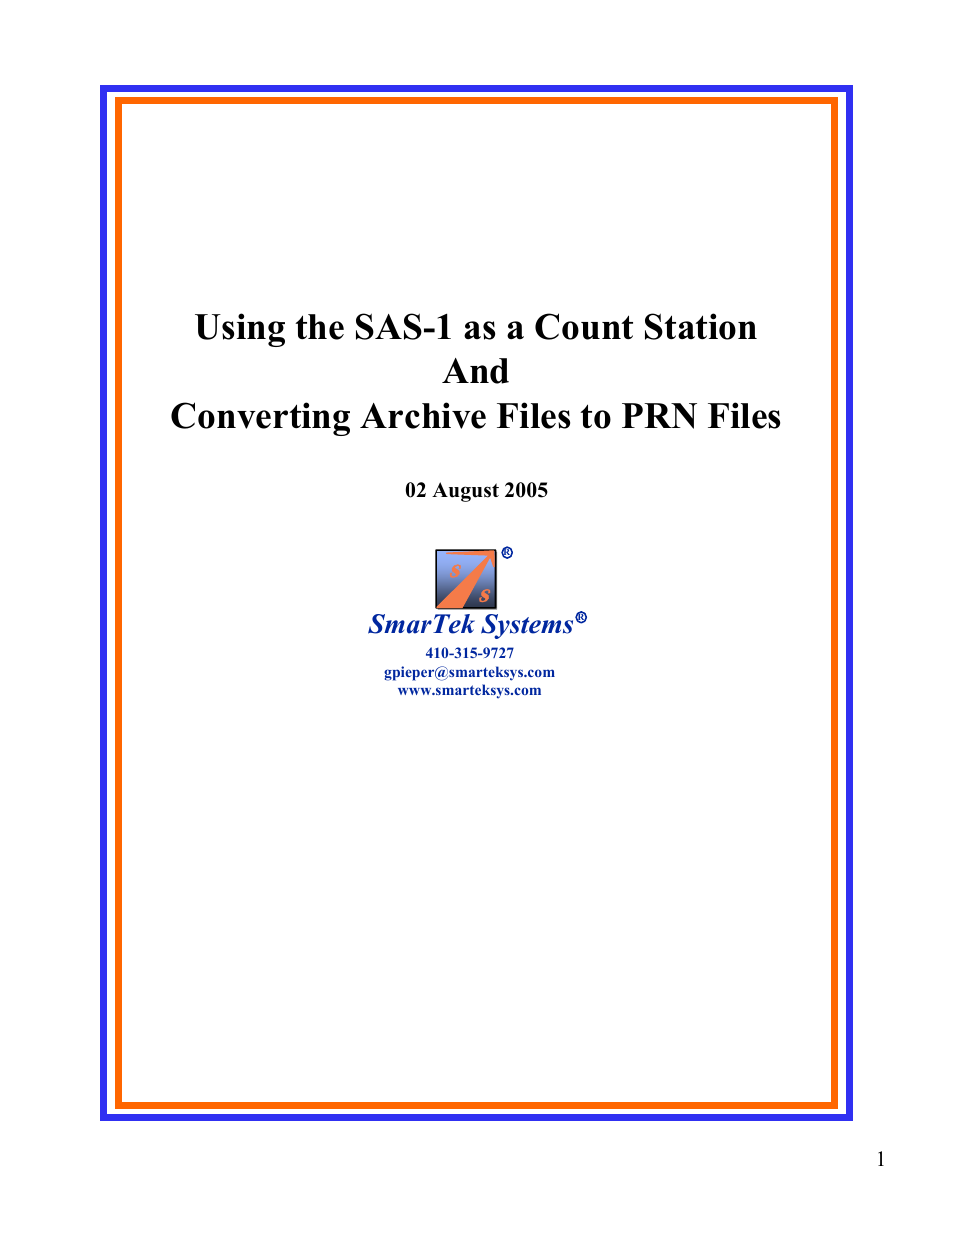 SAS-1 as a Count Station And Converting